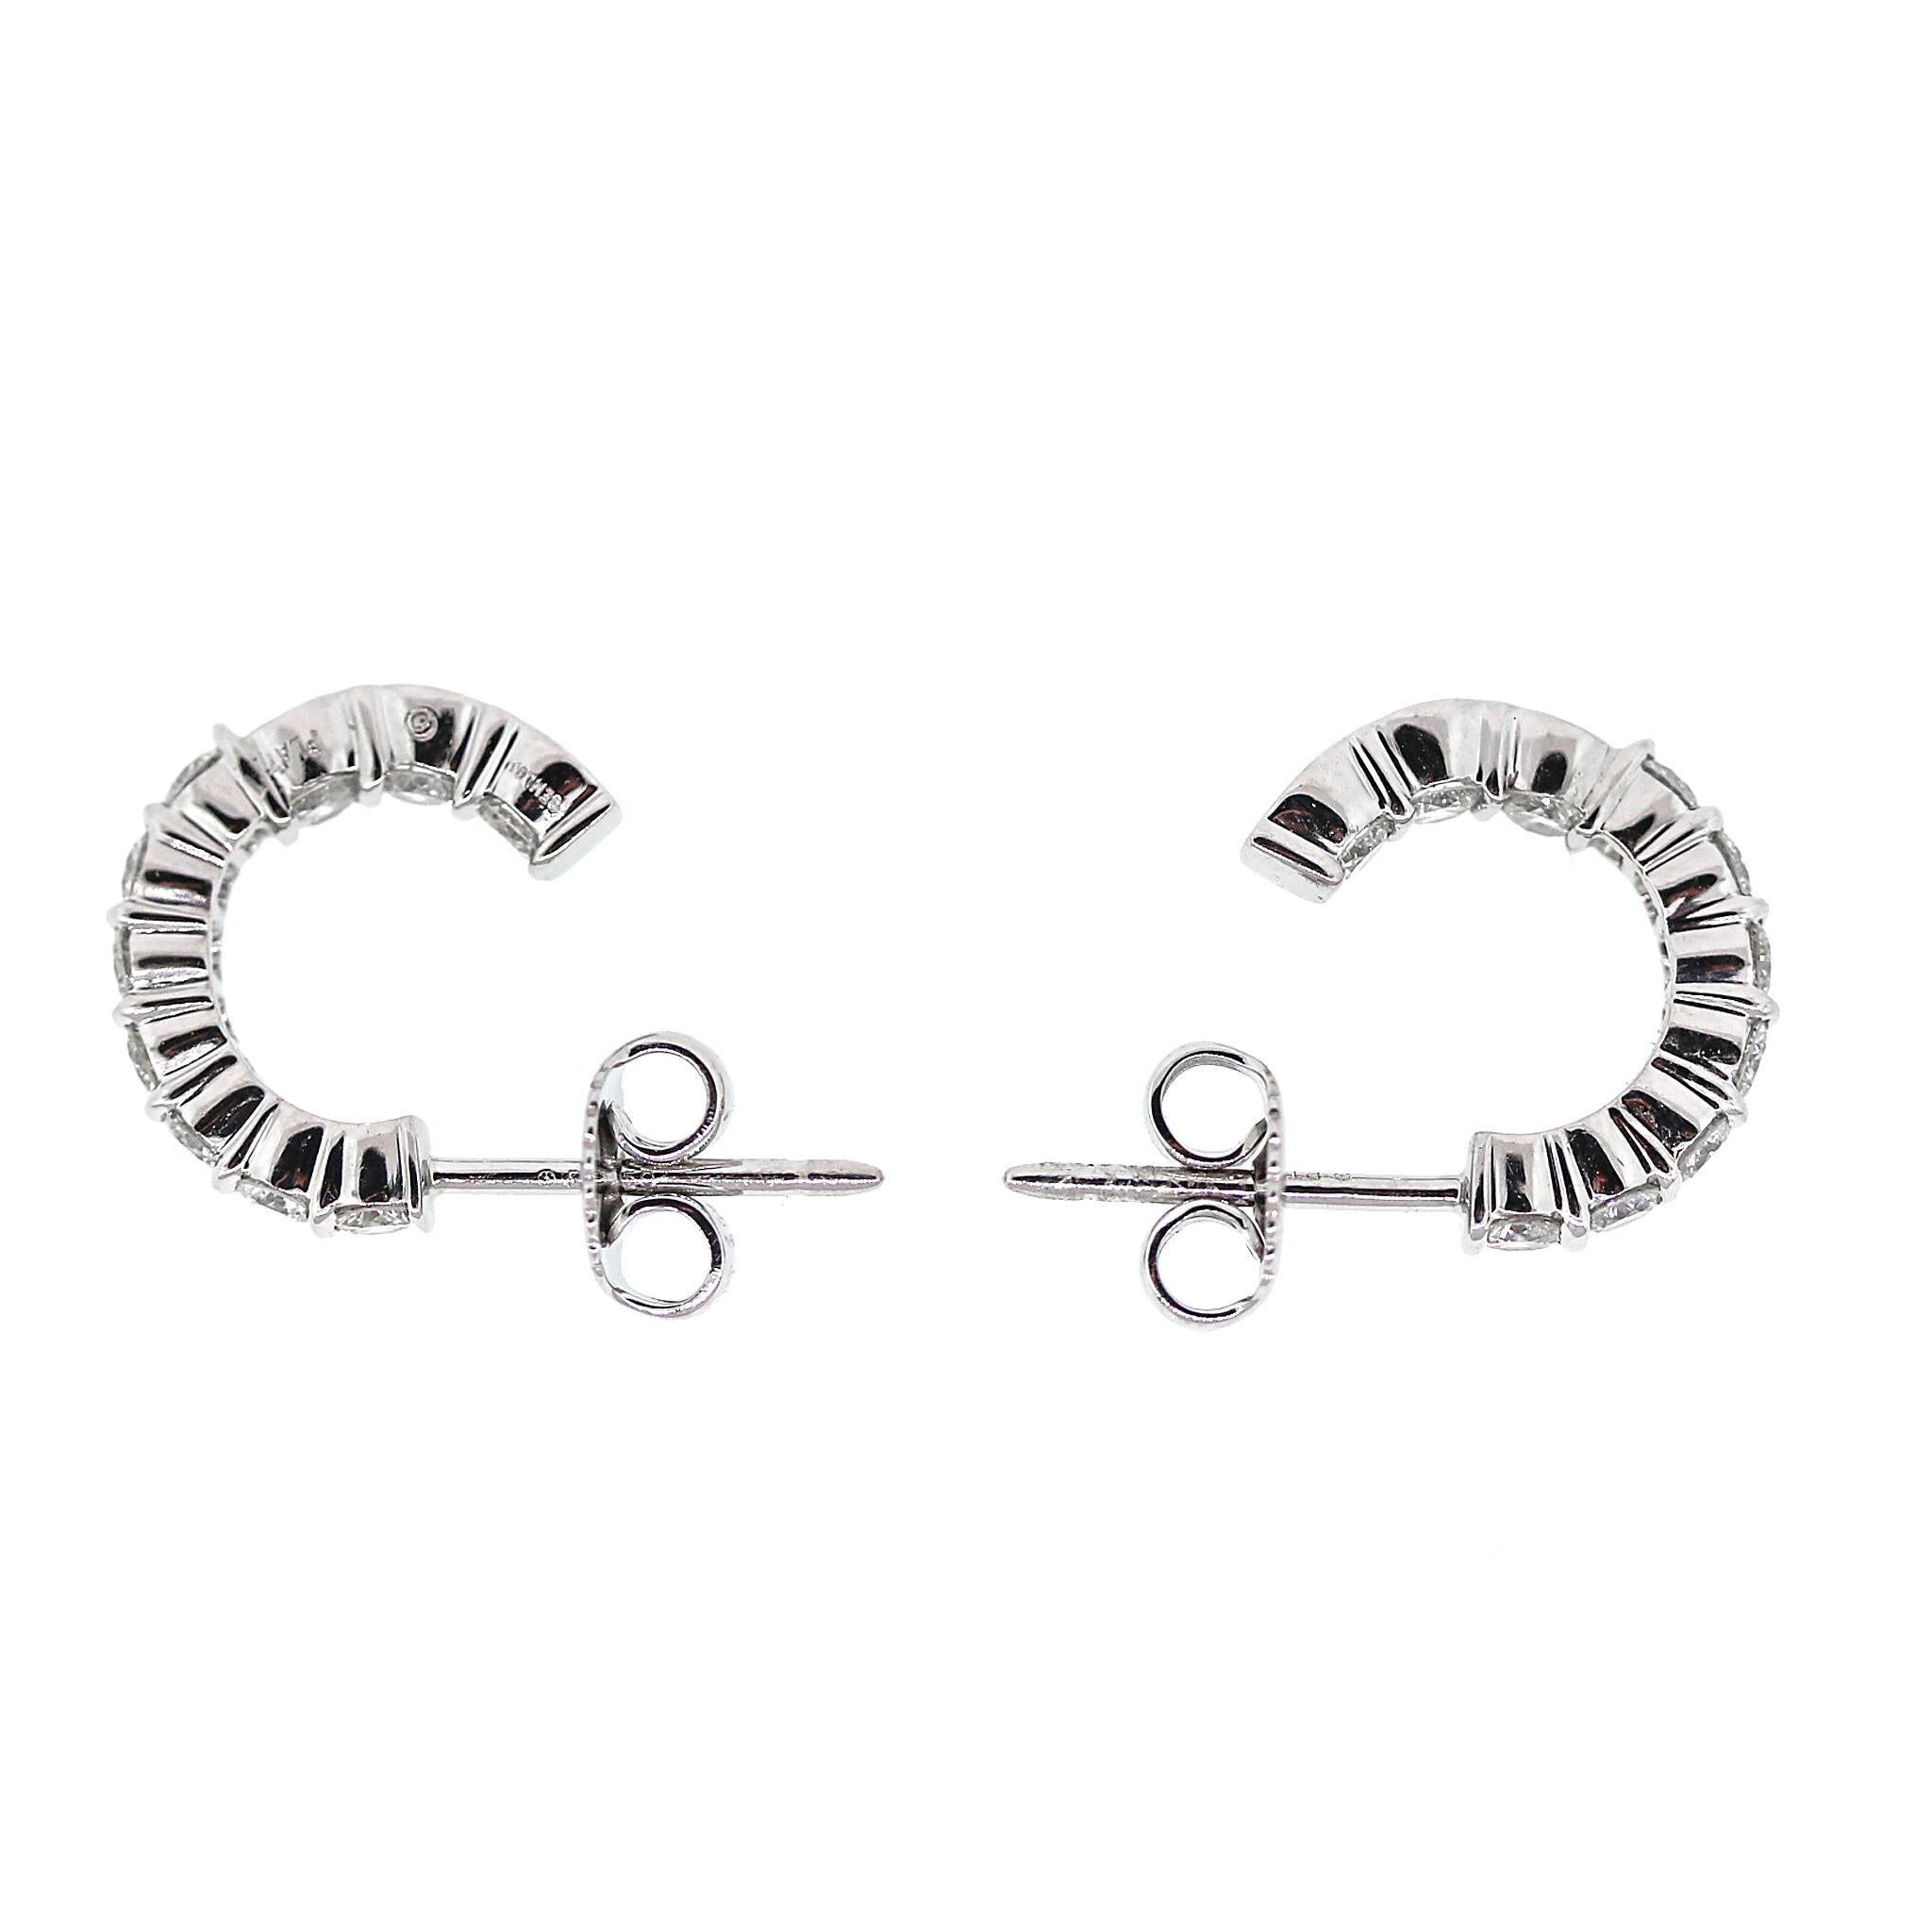 Inside-out Diamond Hoop Earrings In Excellent Condition For Sale In New York, NY